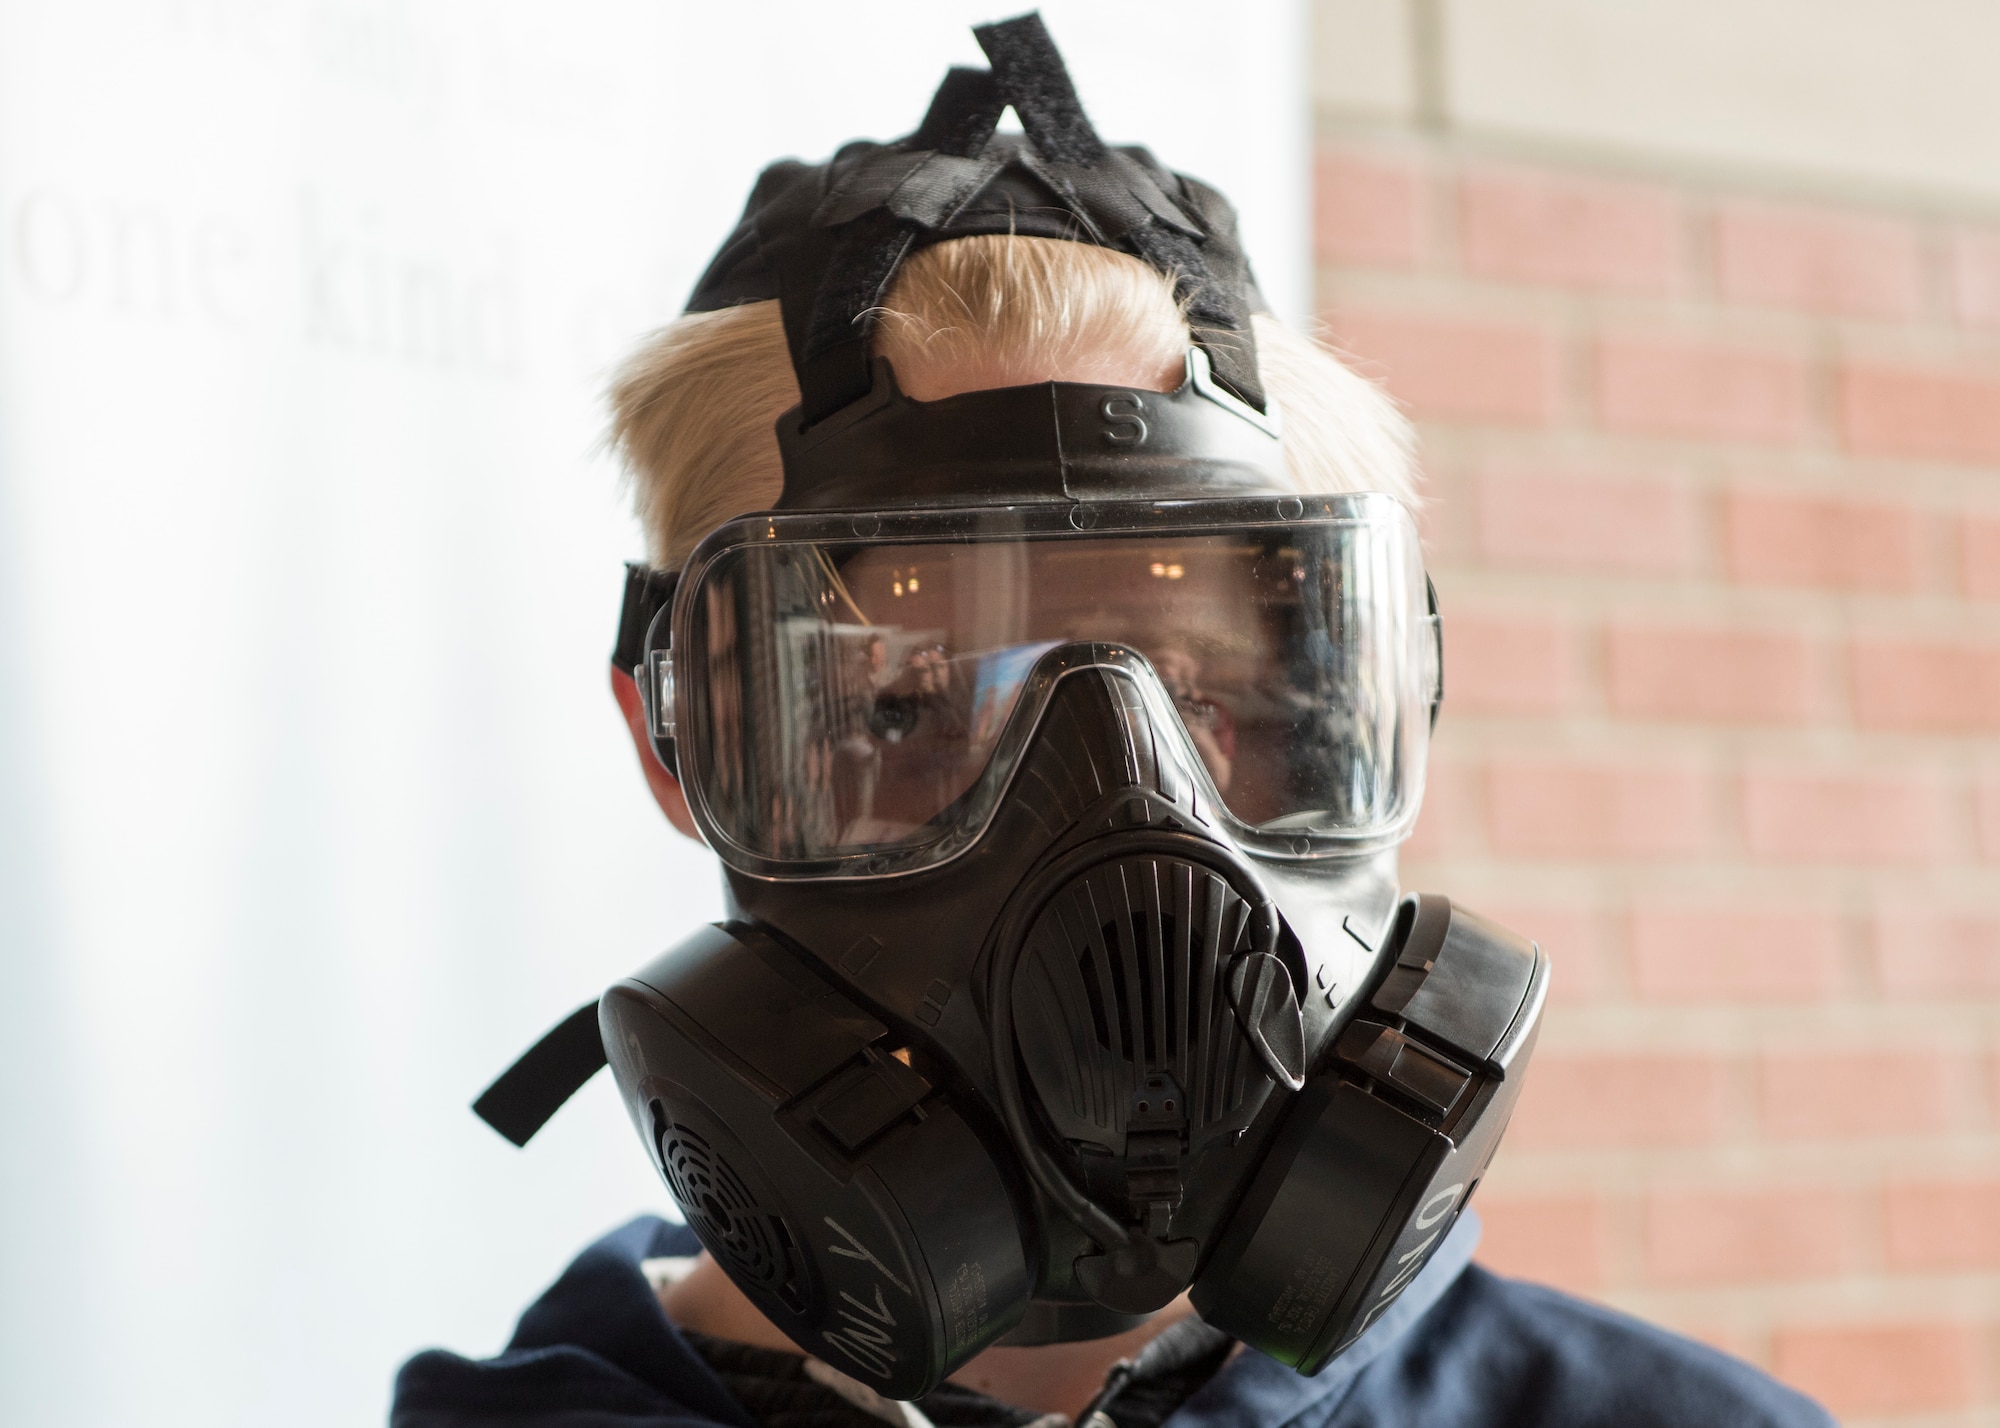 Dustin Ylitalo, Deer Park Middle School student, tries on a M50 gas mask at an informational booth during the  Eastern Washington Regional Science and Engineering Fair at the Spokane Washington State University campus, Washington, March 15, 2018. Members of Team Fairchild attended the fair to provide visiting students with information about the science, technology, engineering and math related fields that the U.S. Air Force offers. (U.S. Air Force photo/Senior Airman Ryan Lackey)